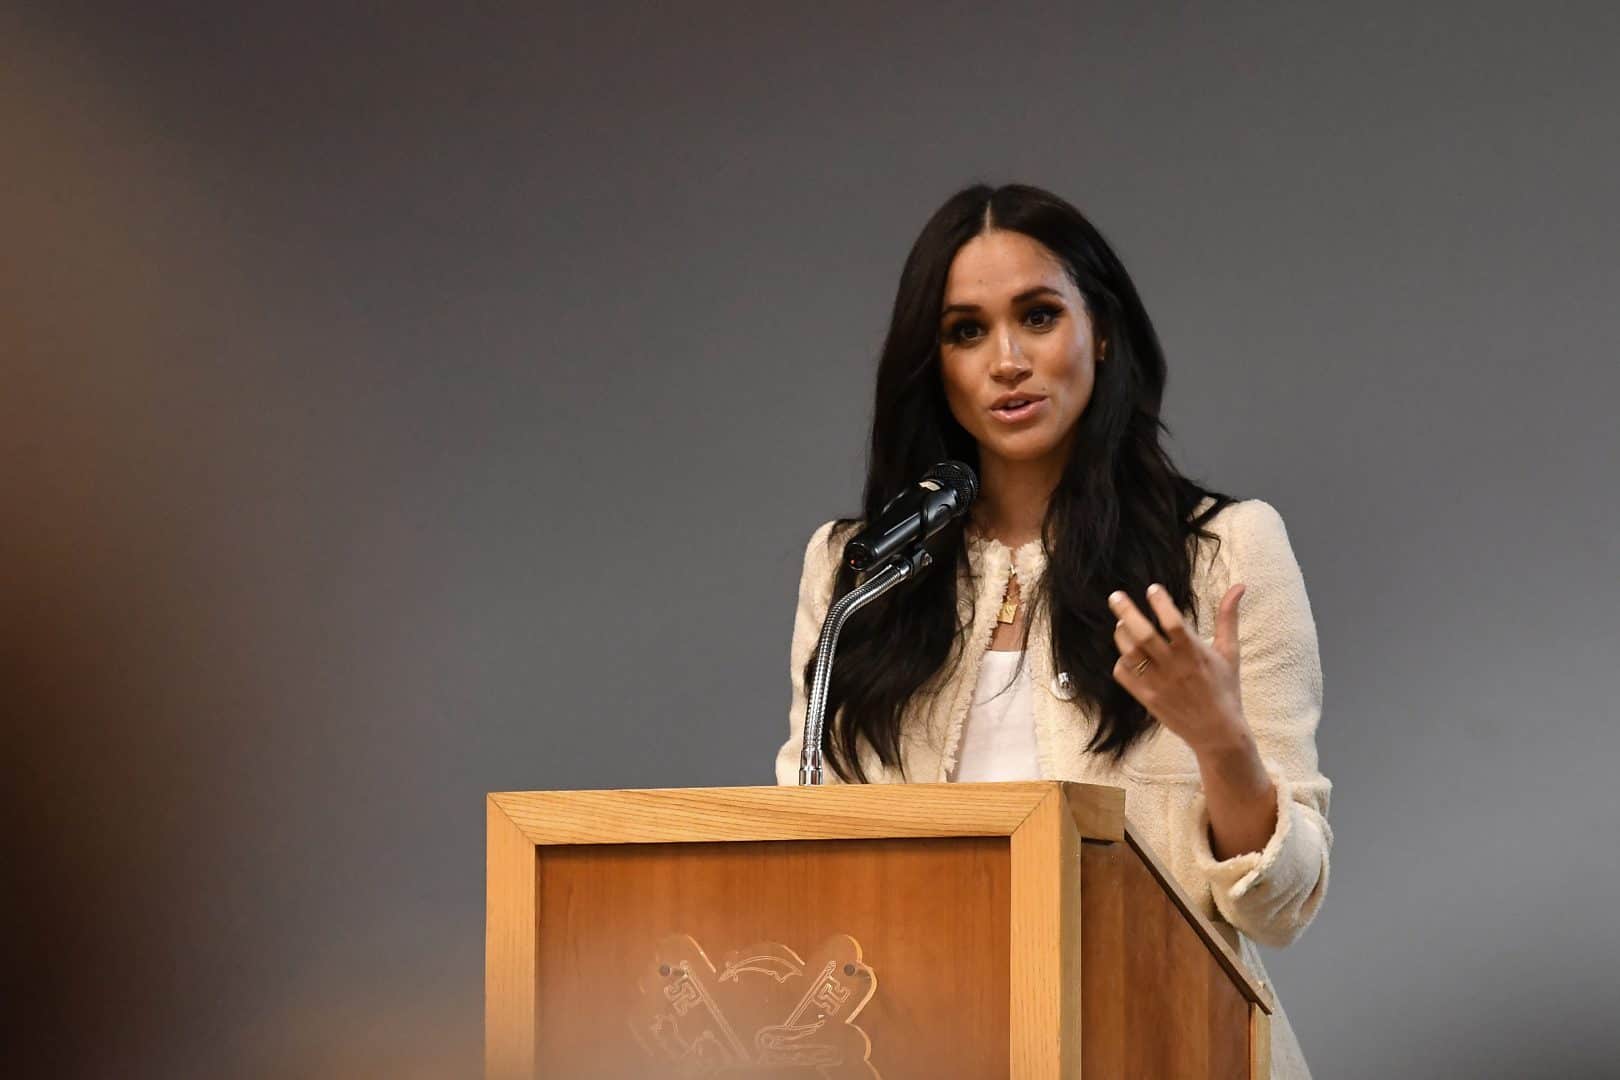 Meghan’s International Women’s Day message to men: ‘value women in your lives’